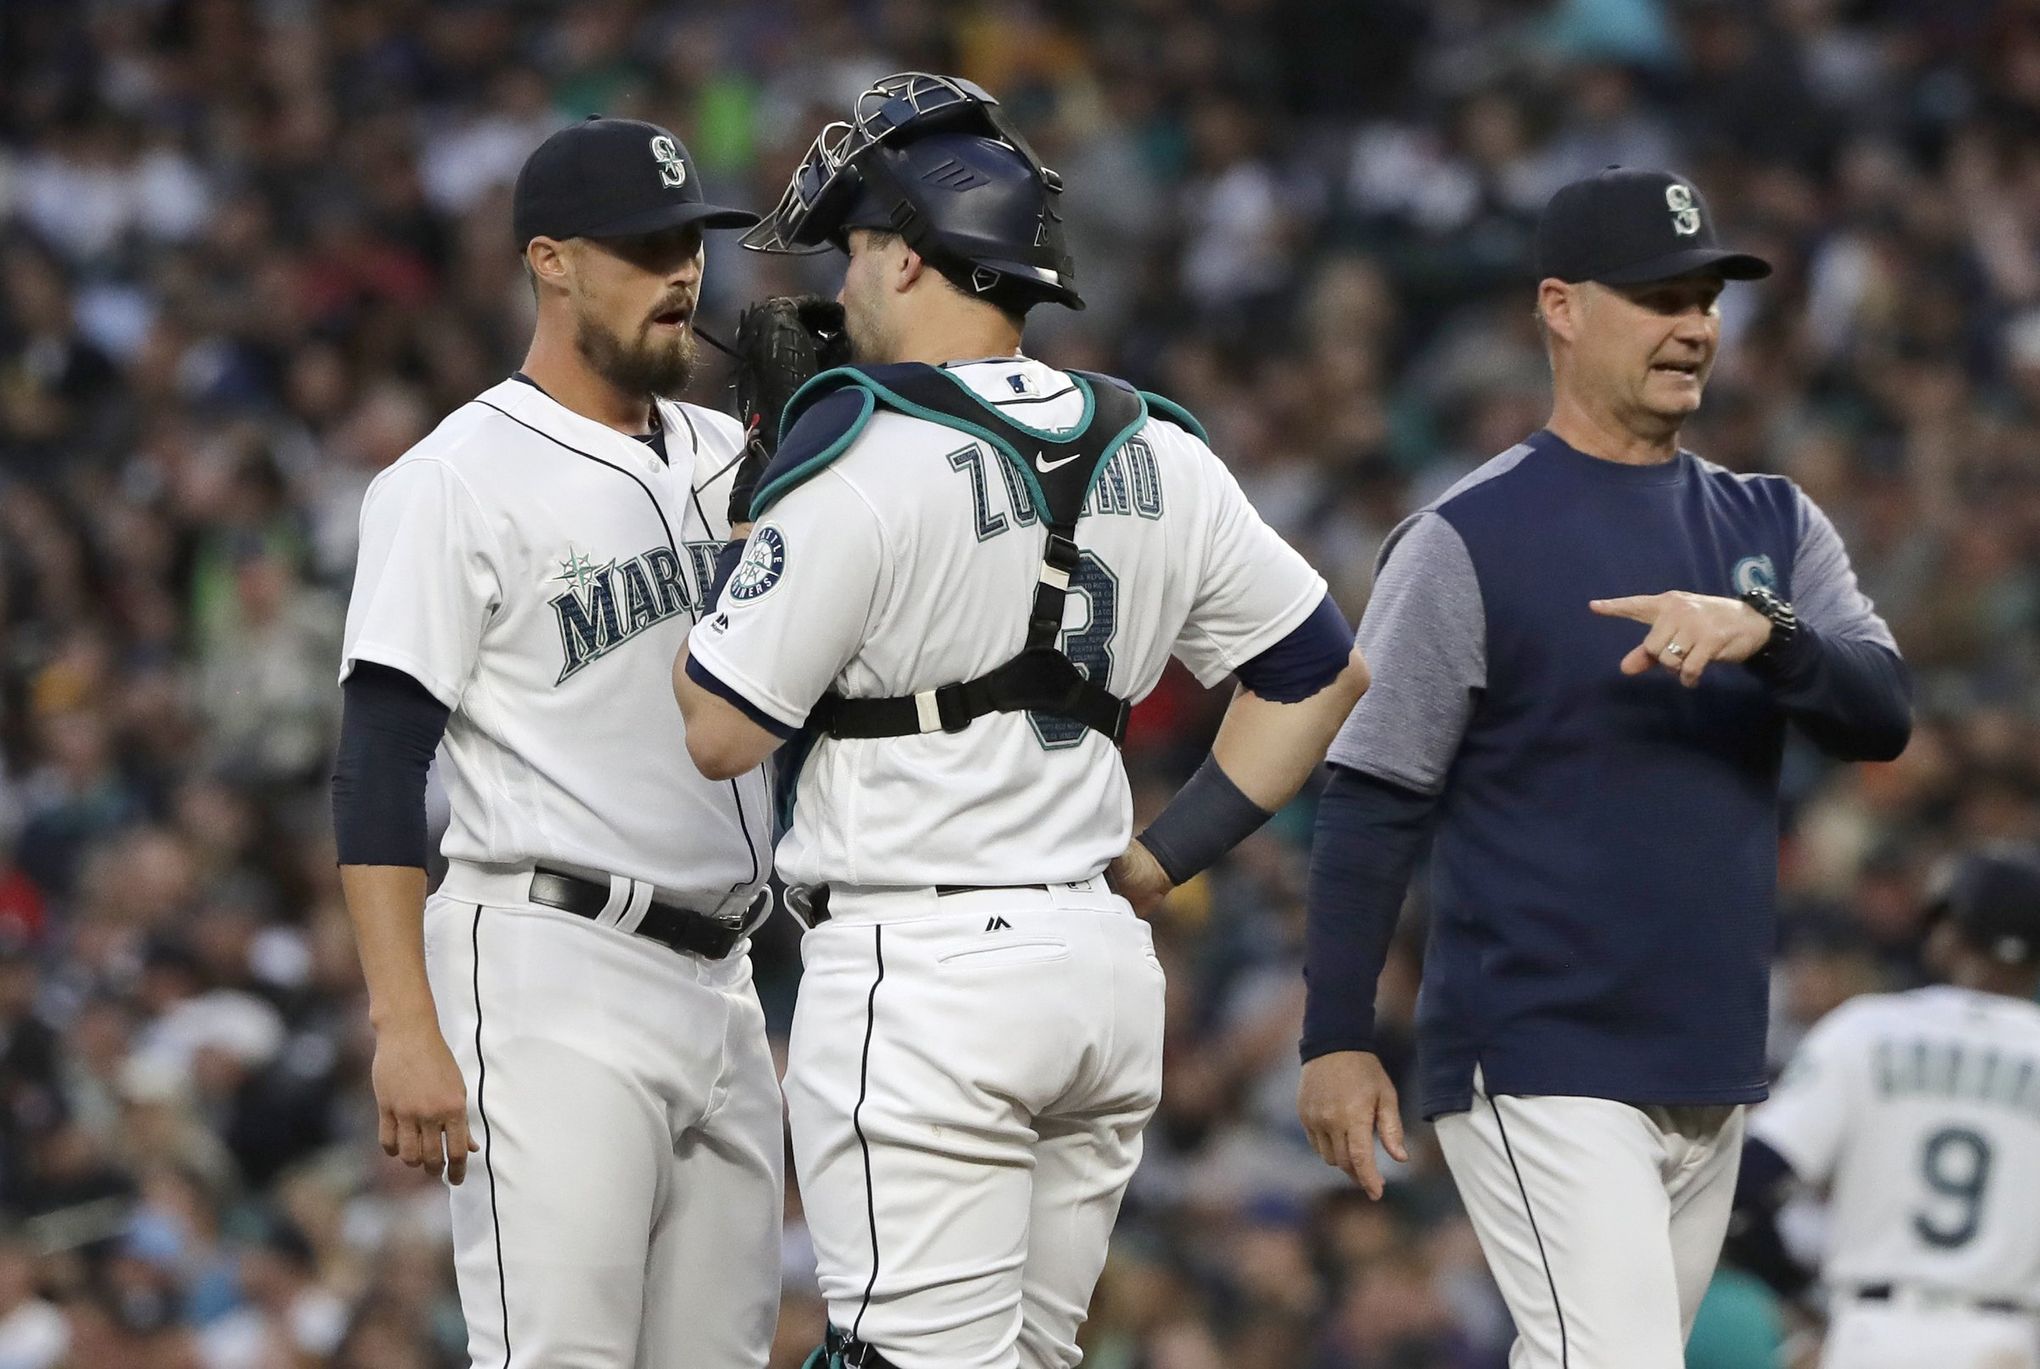 Seattle Mariners roster and schedule for 2020 season - NBC Sports